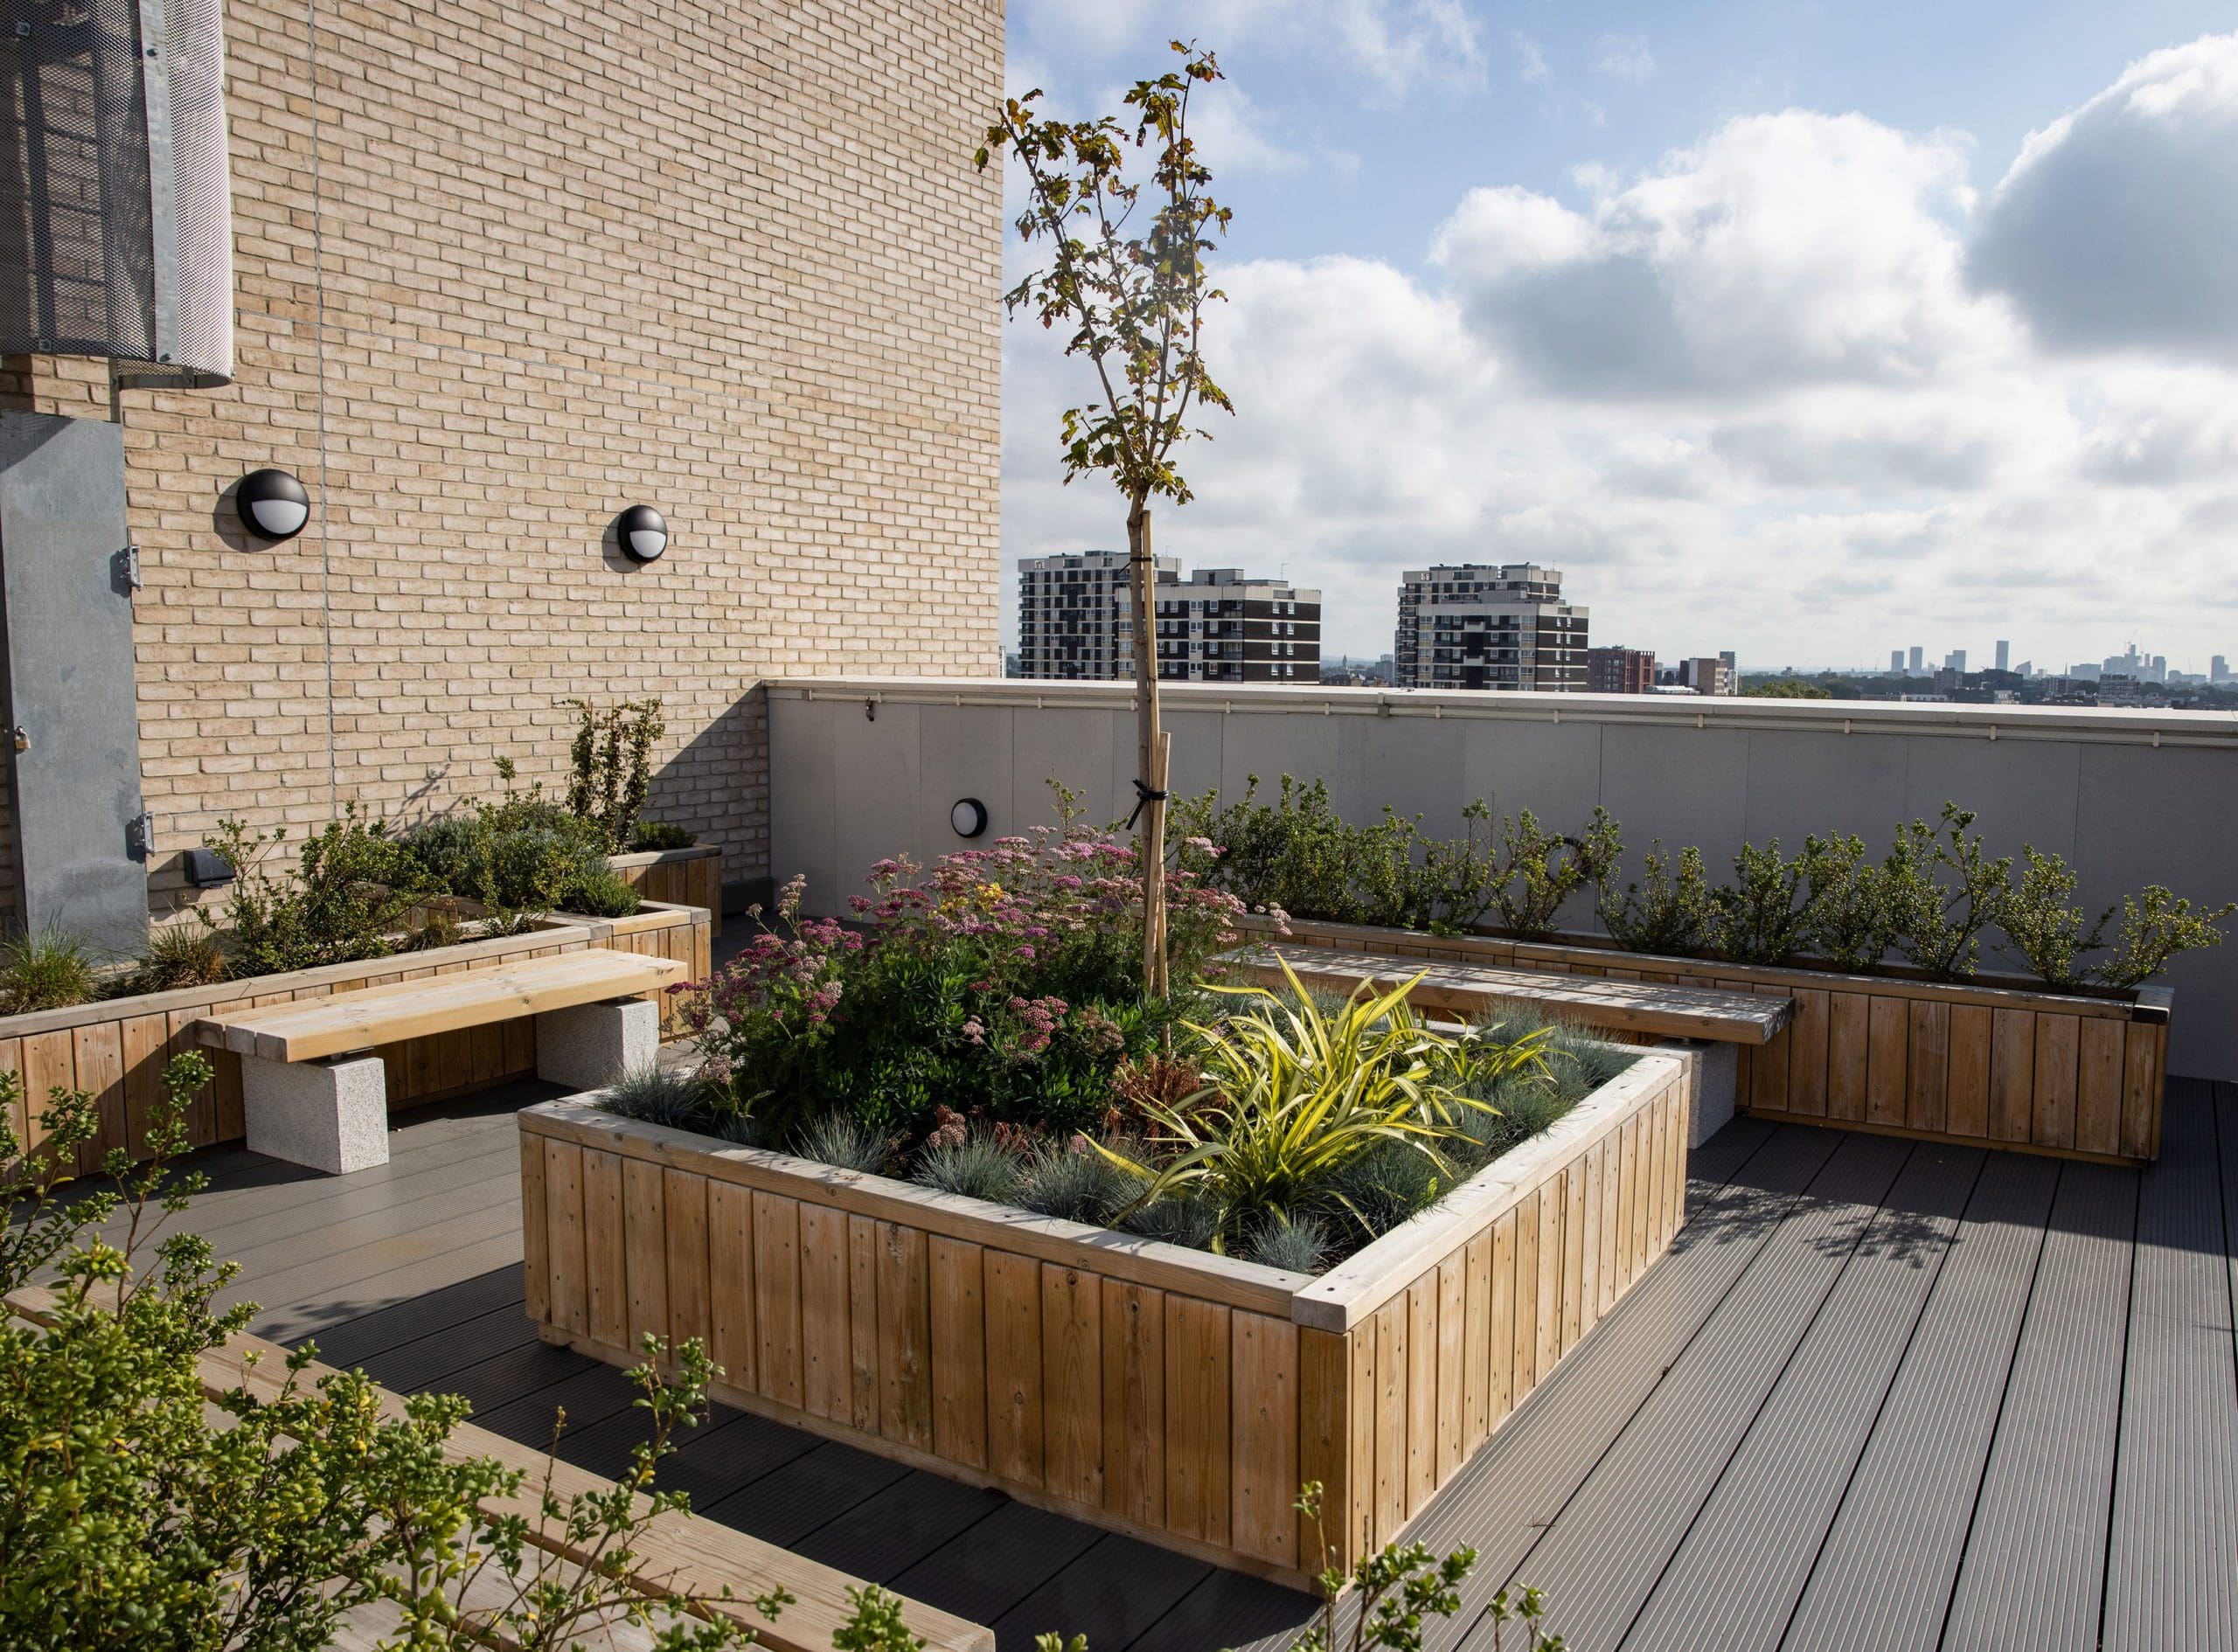 centre piece wooden raised planter filled with bushes and small tree surrounded by benches and smaller planters on building rooftop